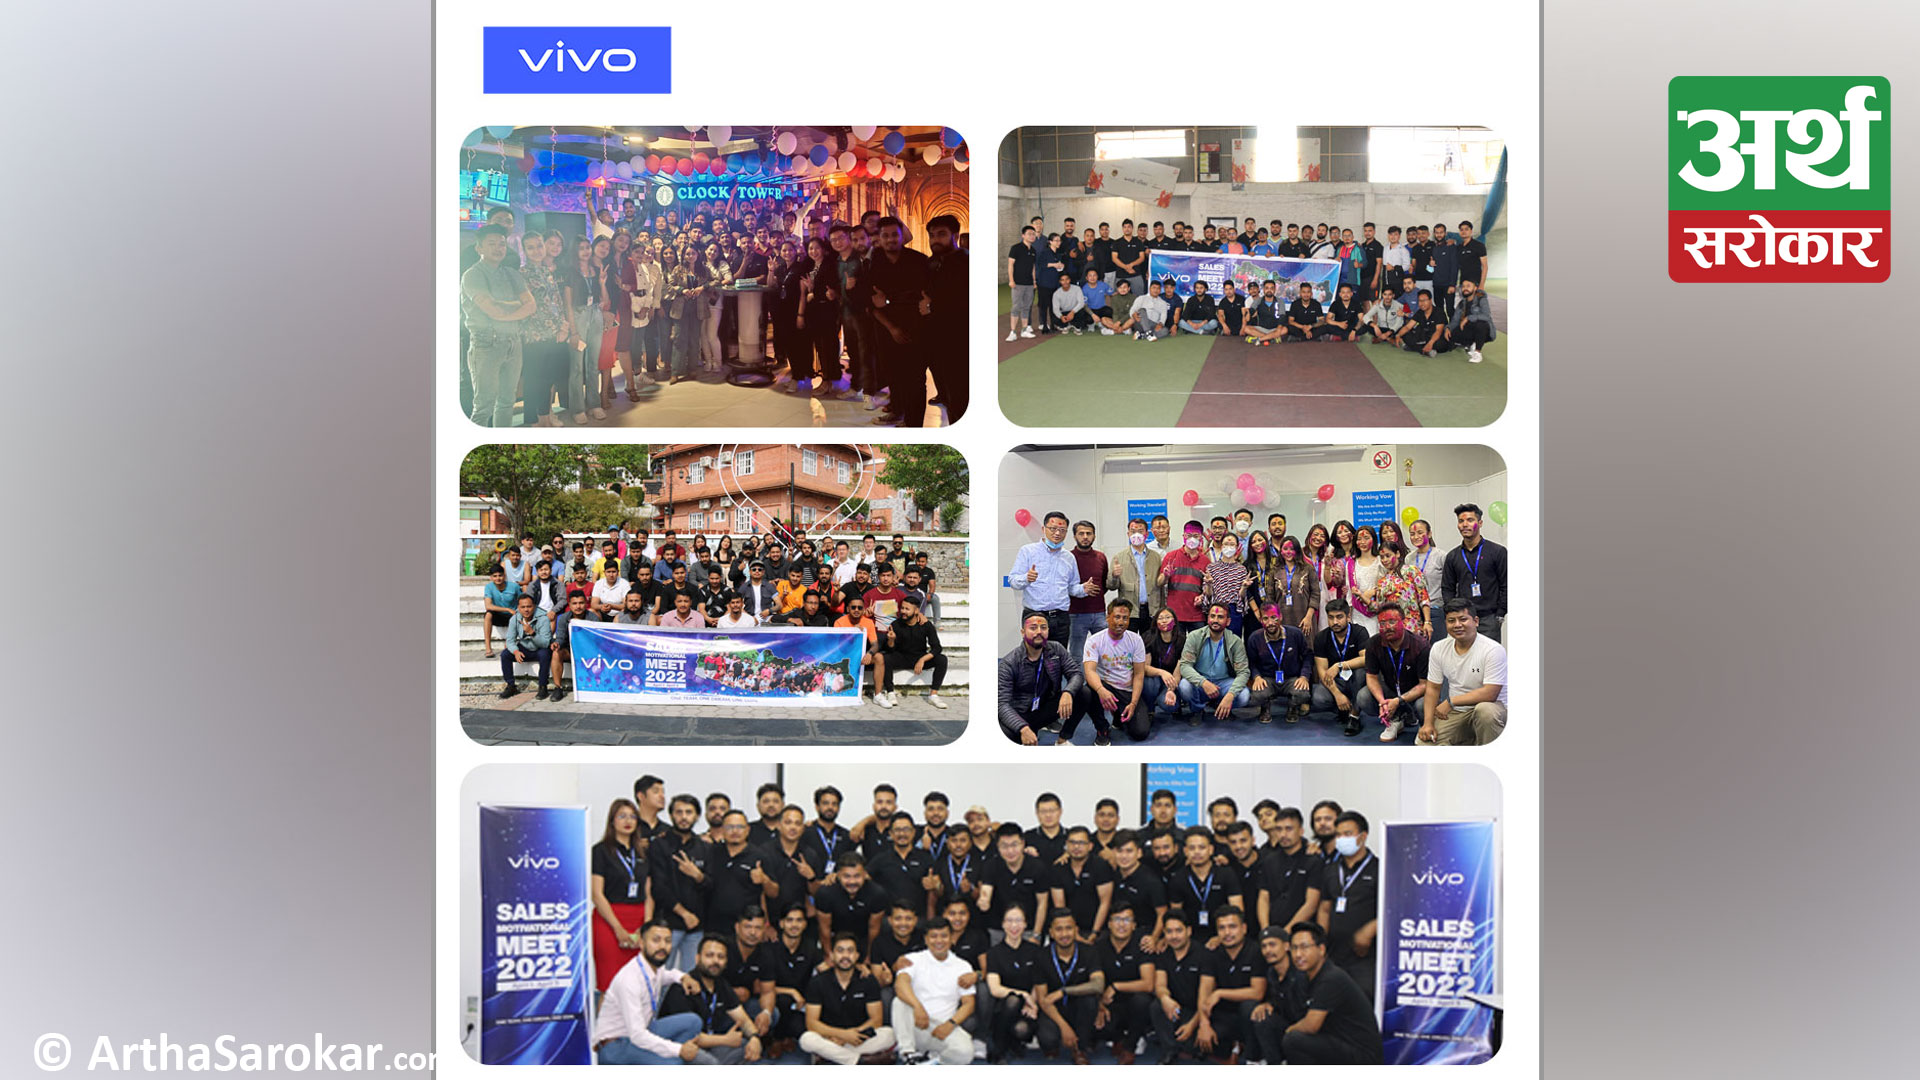 Going “More Local More Global” at vivo Nepal